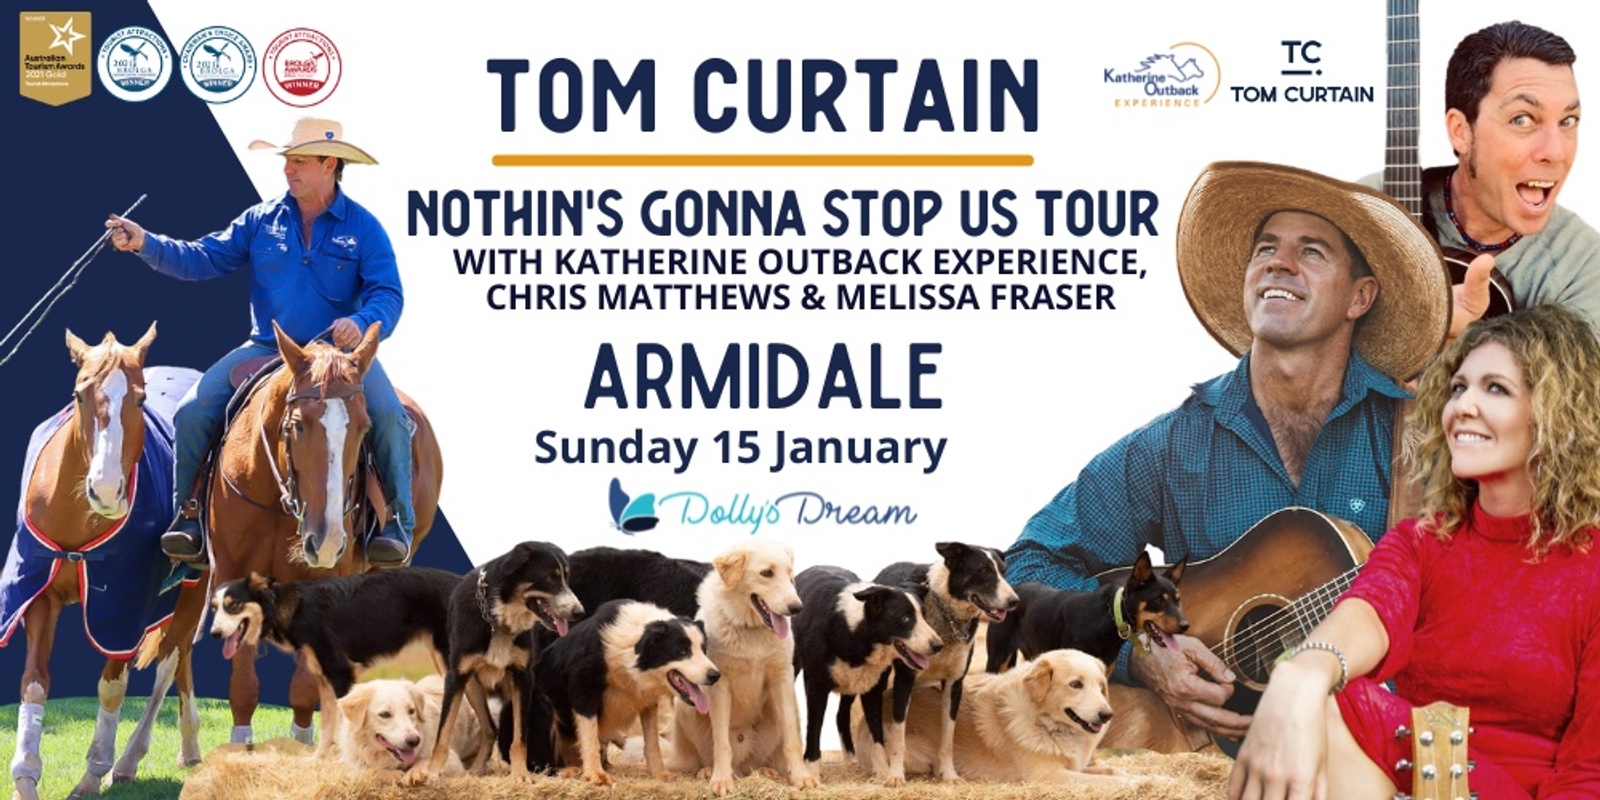 Banner image for Tom Curtain Tour - ARMIDALE NSW